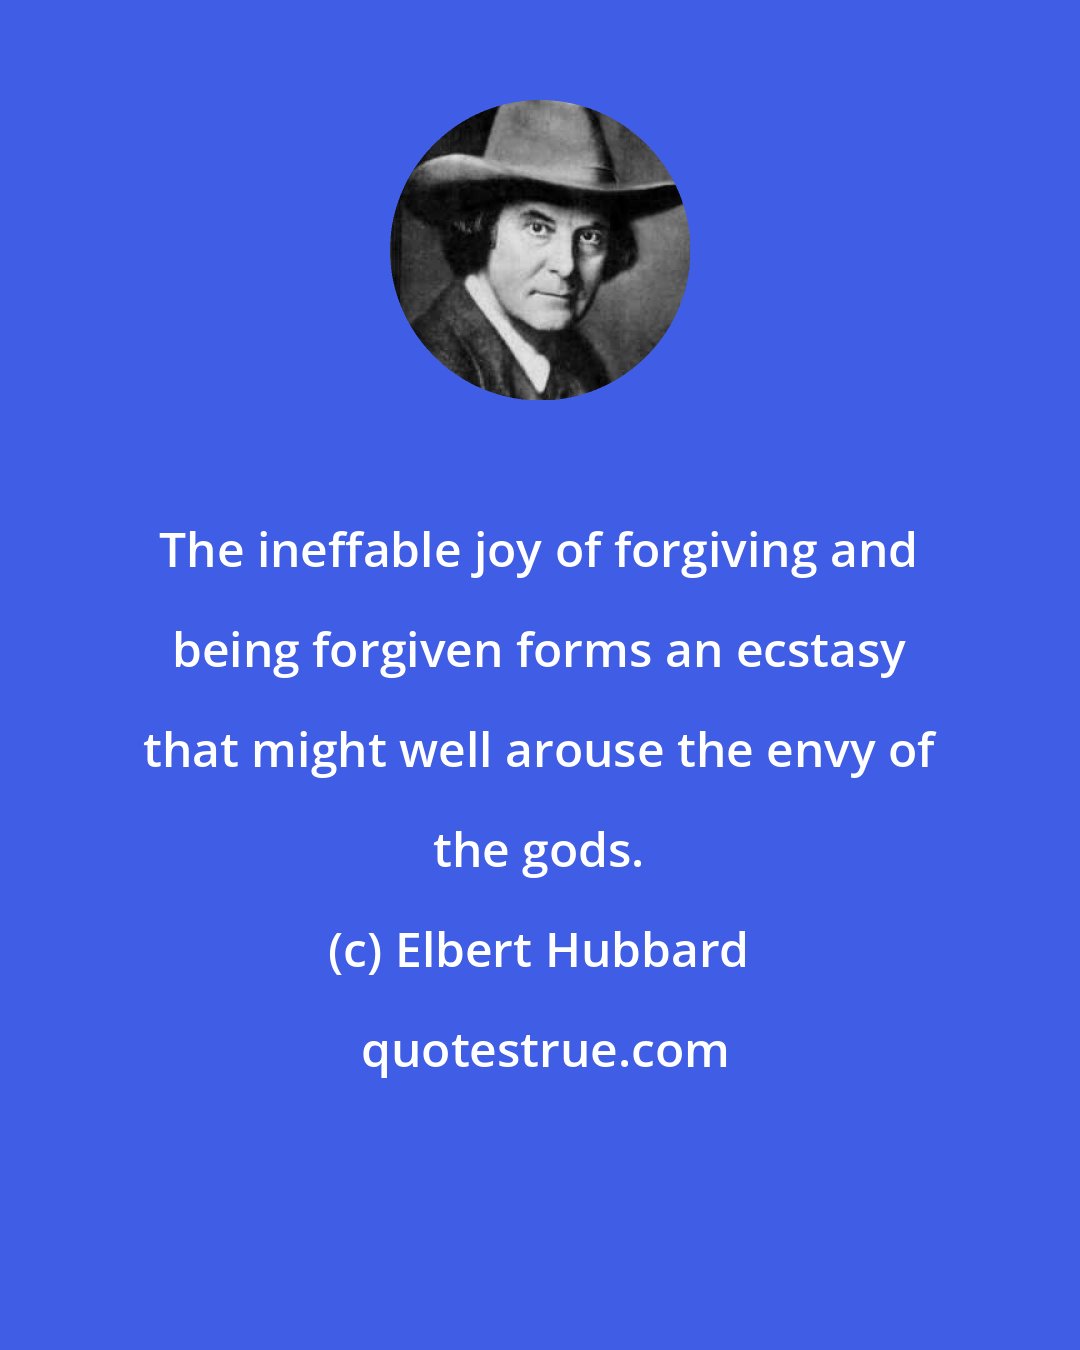 Elbert Hubbard: The ineffable joy of forgiving and being forgiven forms an ecstasy that might well arouse the envy of the gods.